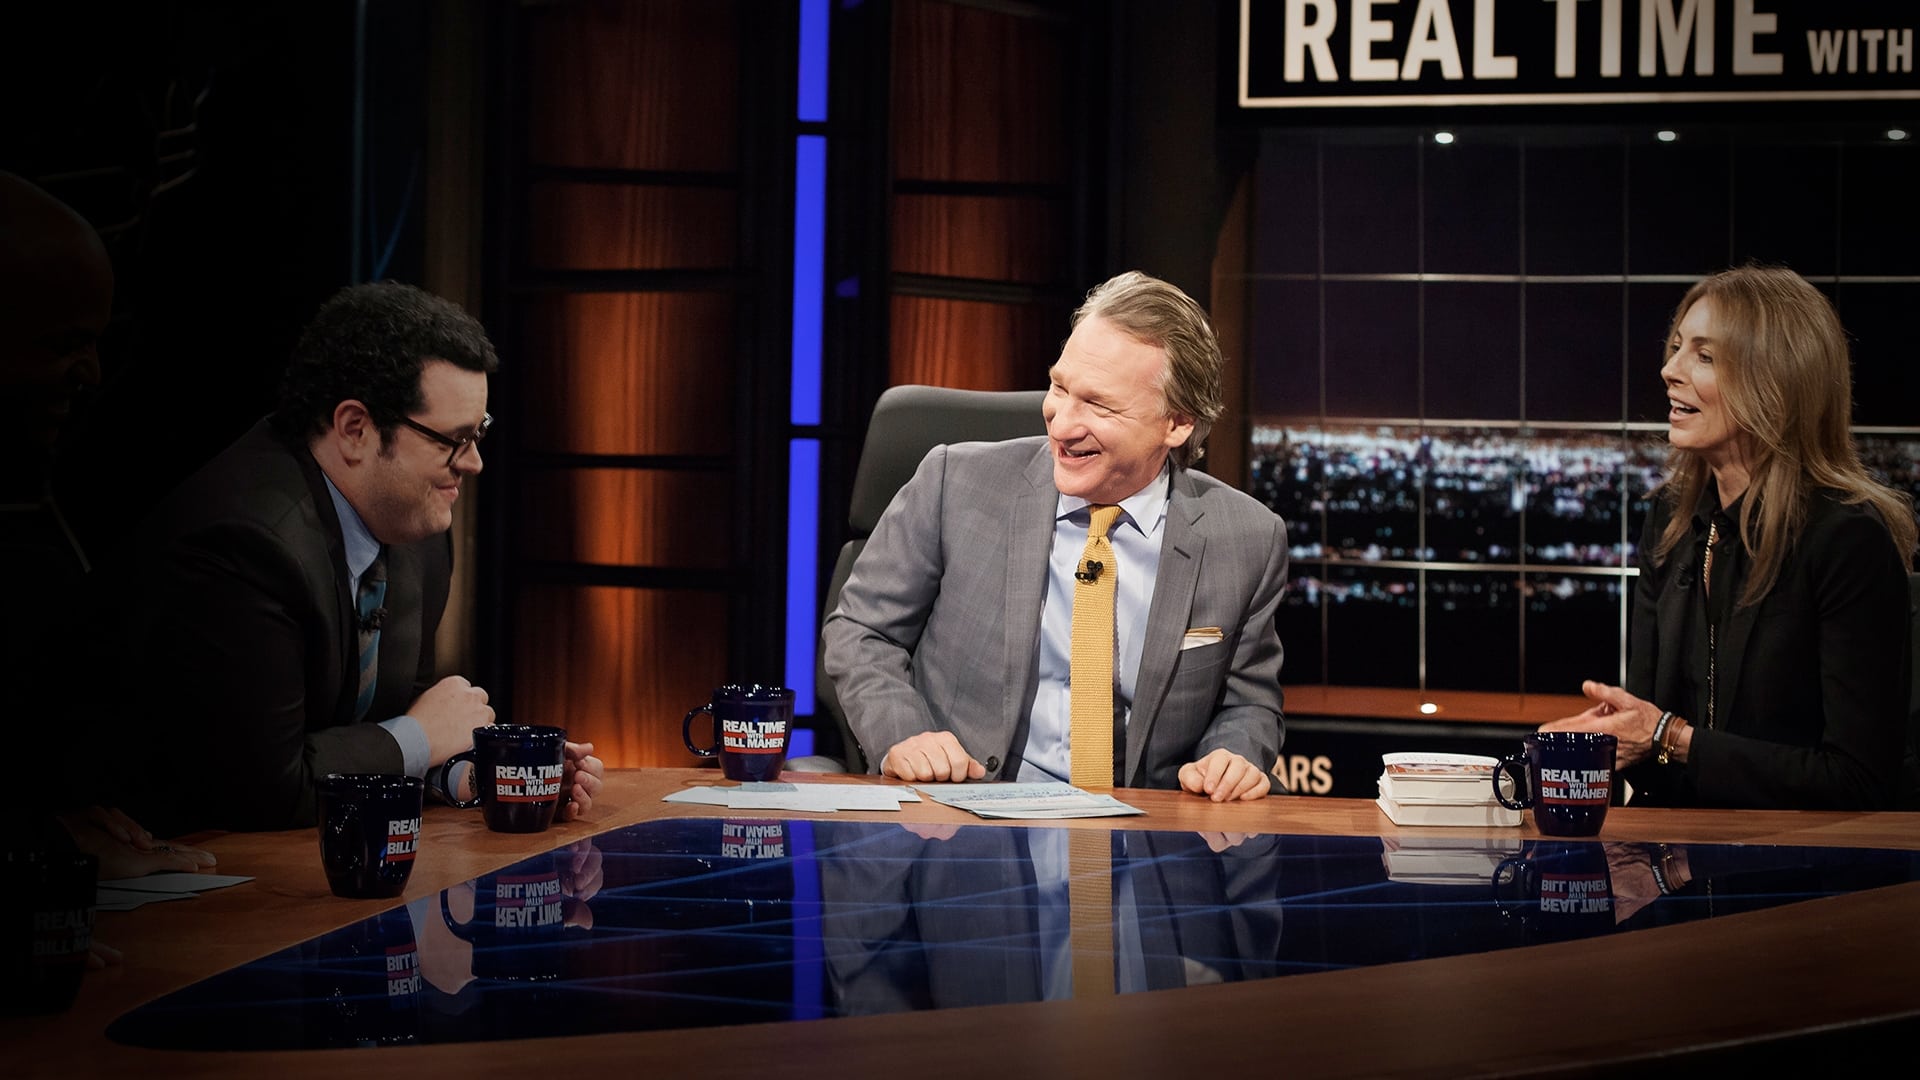 Real Time with Bill Maher Staffel 13 :Folge 2 